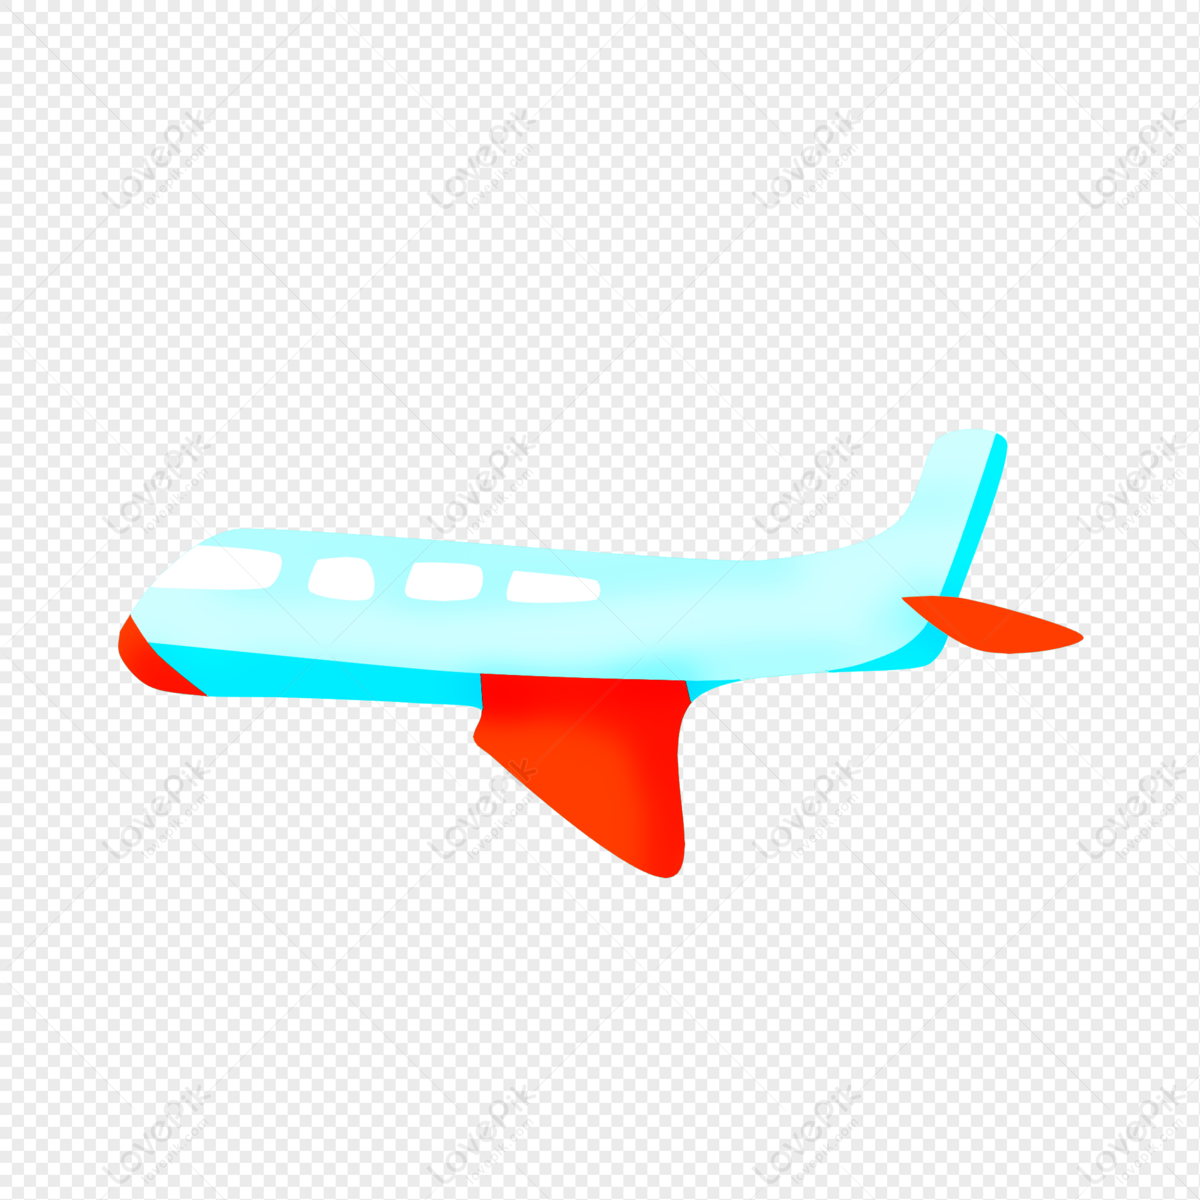 Blue Plane PNG Transparent Background And Clipart Image For Free Download -  Lovepik | 401287480